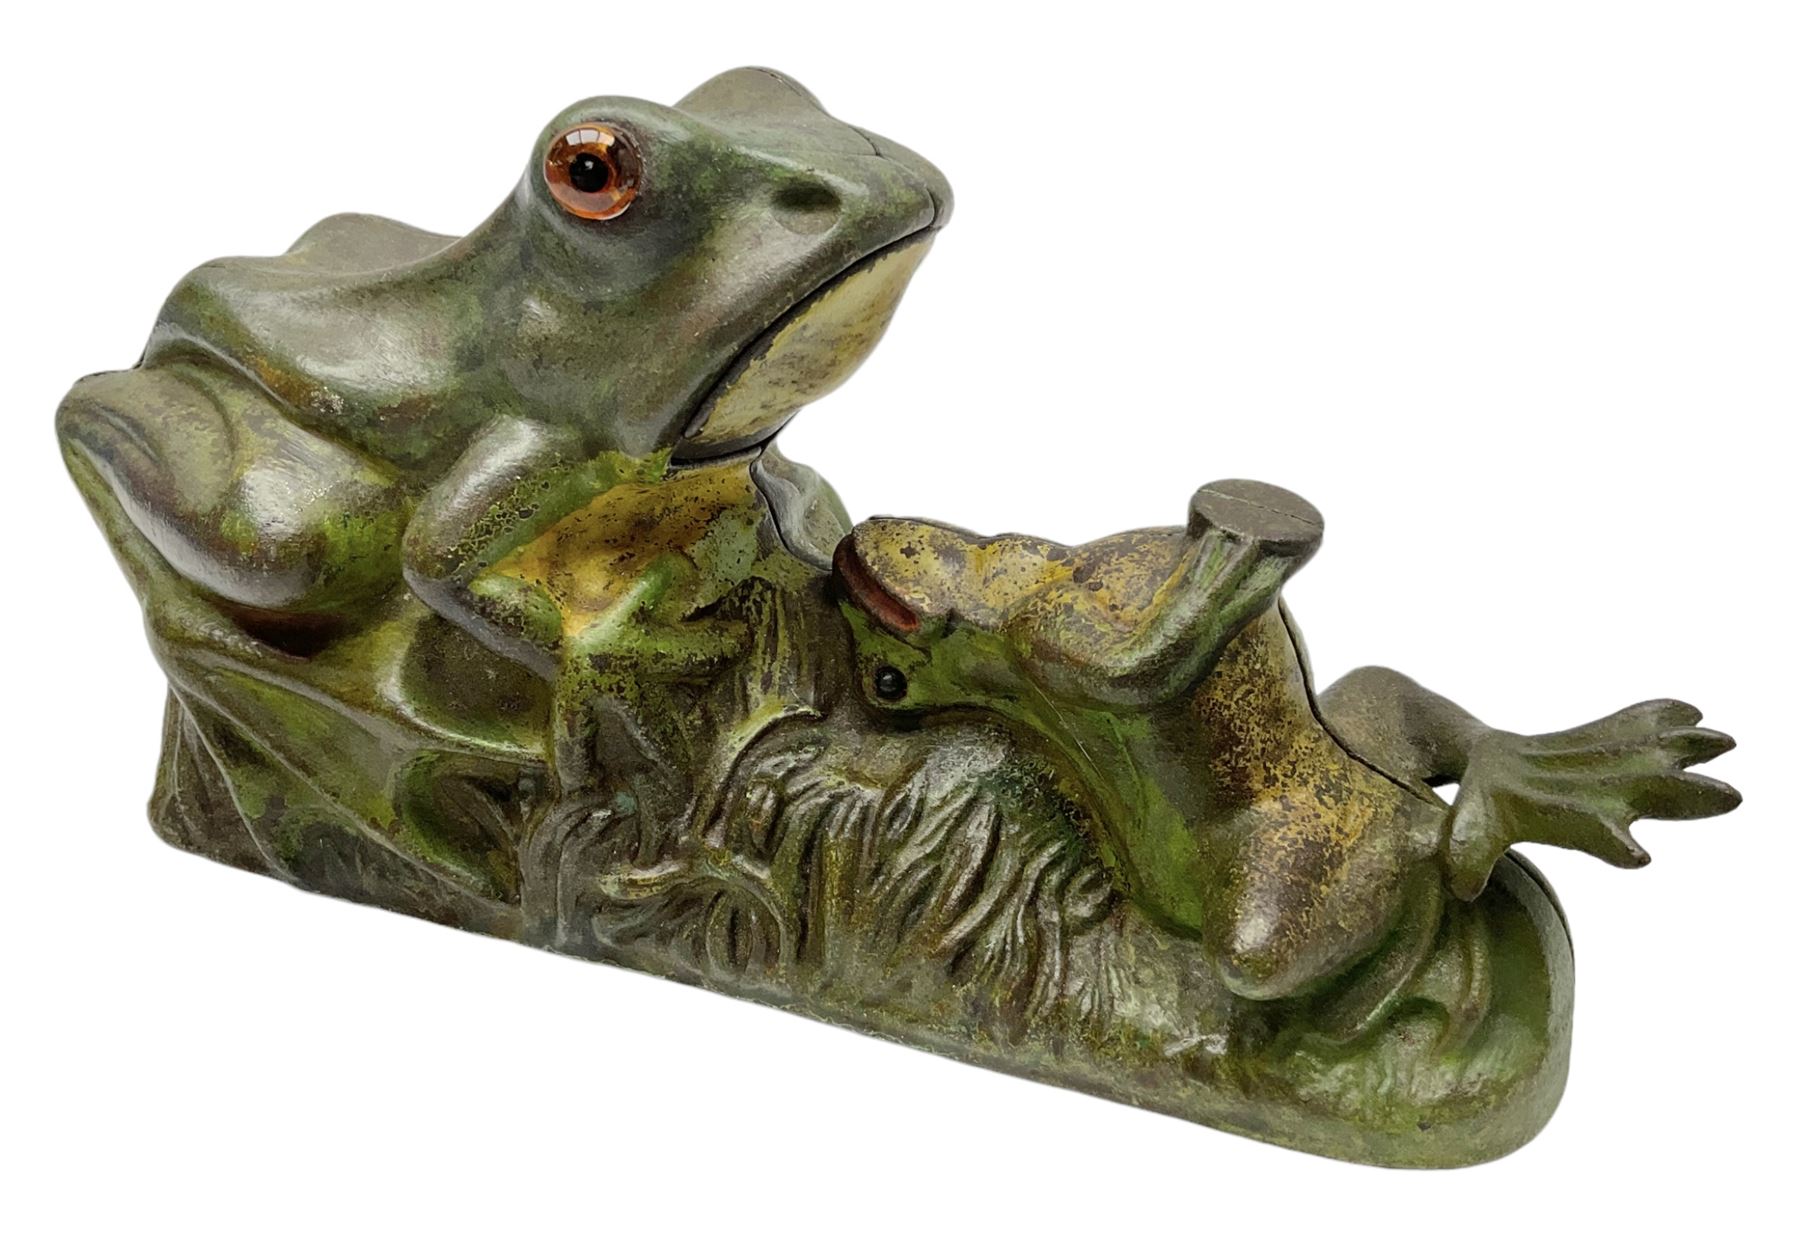 Late 19th century cast-iron mechanical money bank ' Two Frogs' by J & E Stevens & Co; patented 8th A